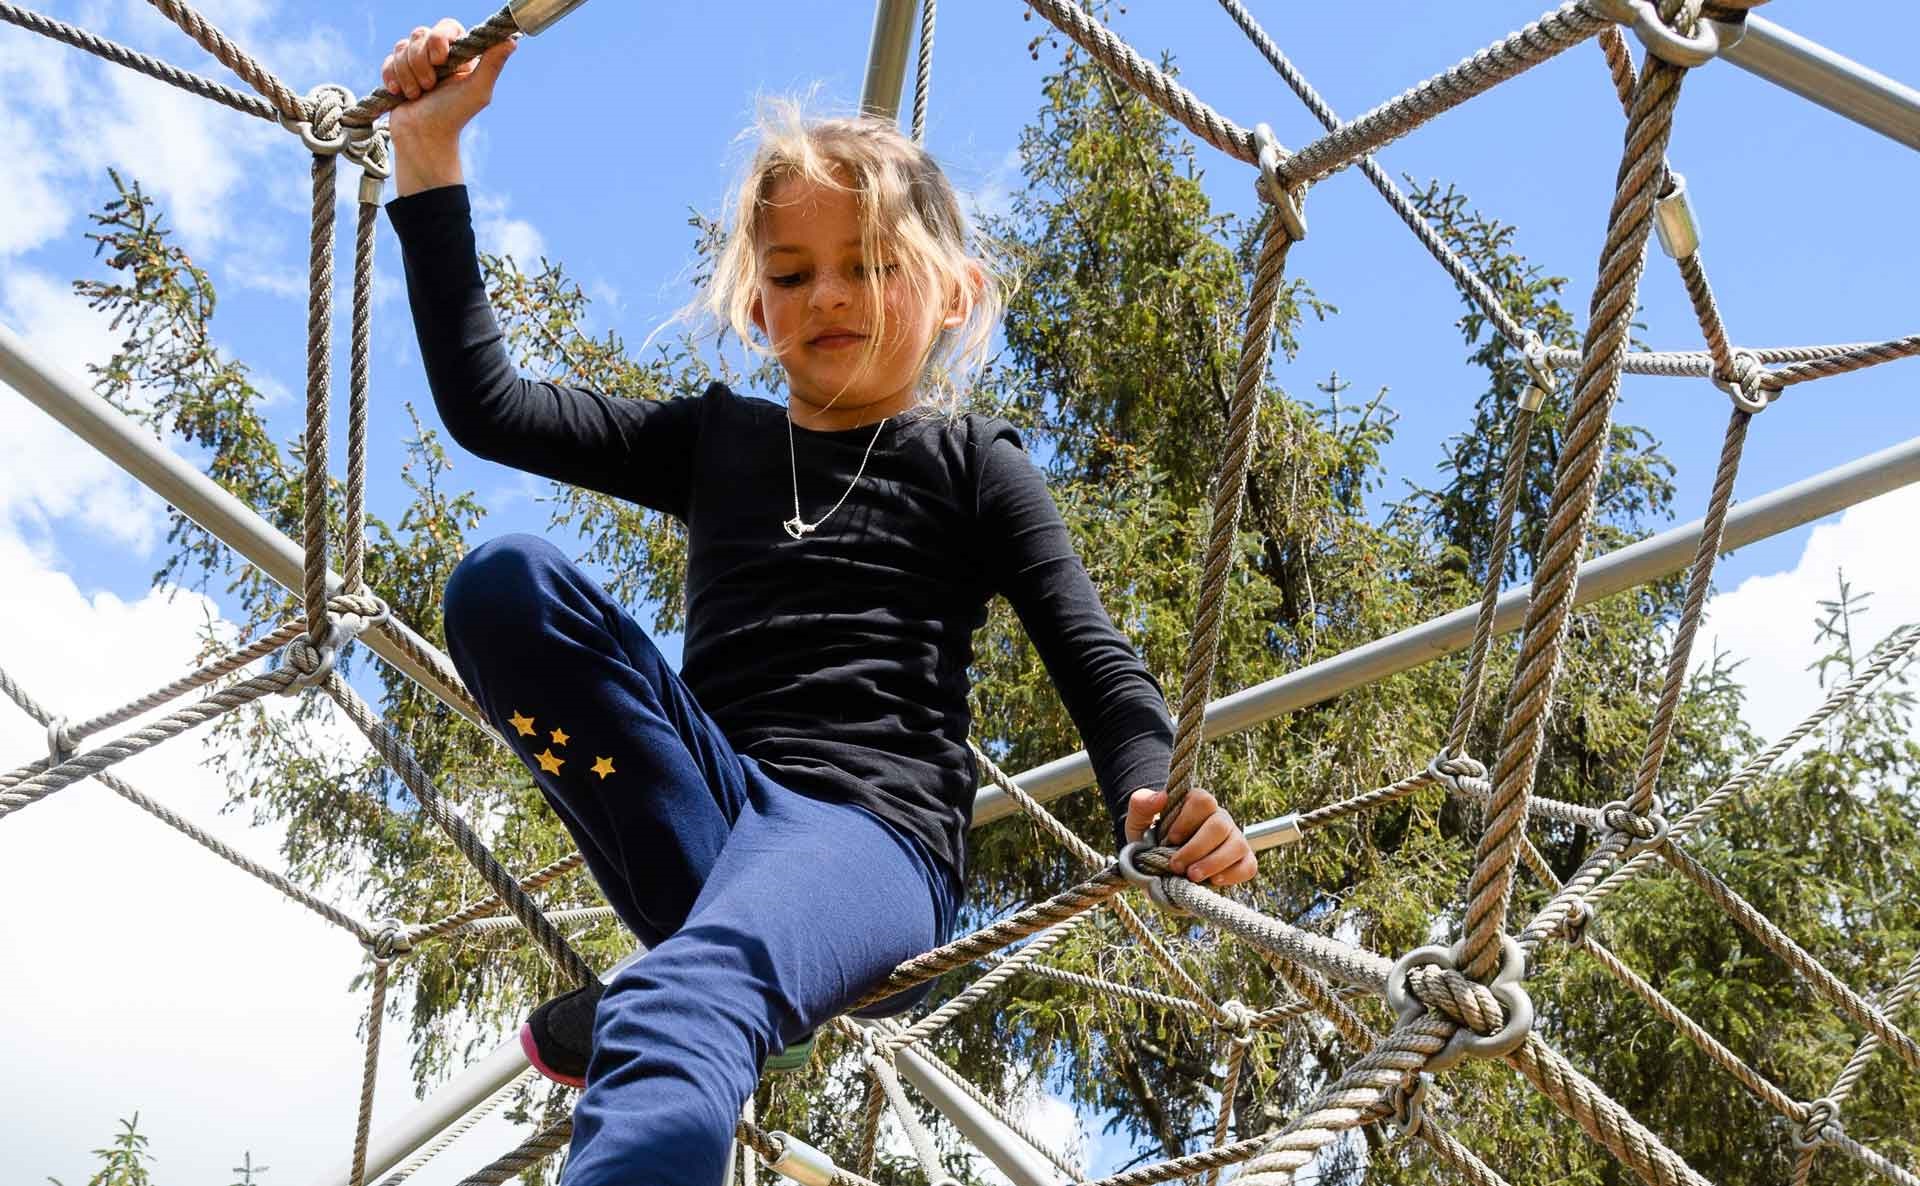 Young girl climbing on playground ropes.